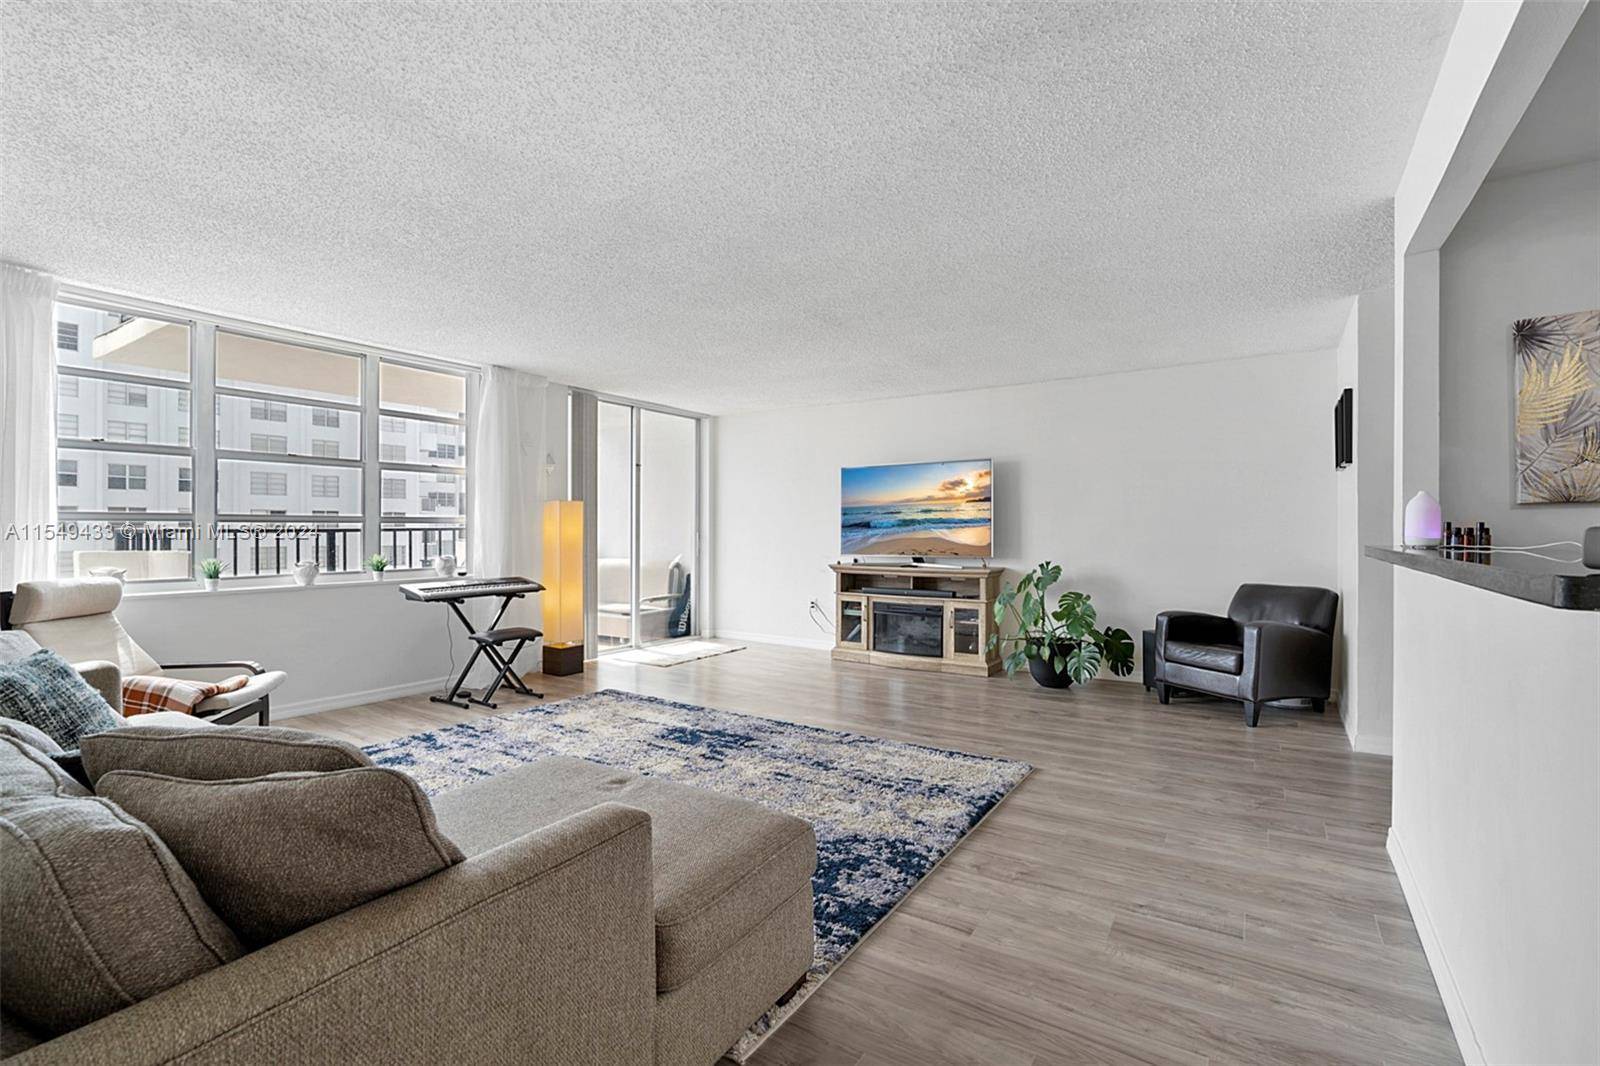 Come by to see this one of a kind unit on the 19th floor with water views.